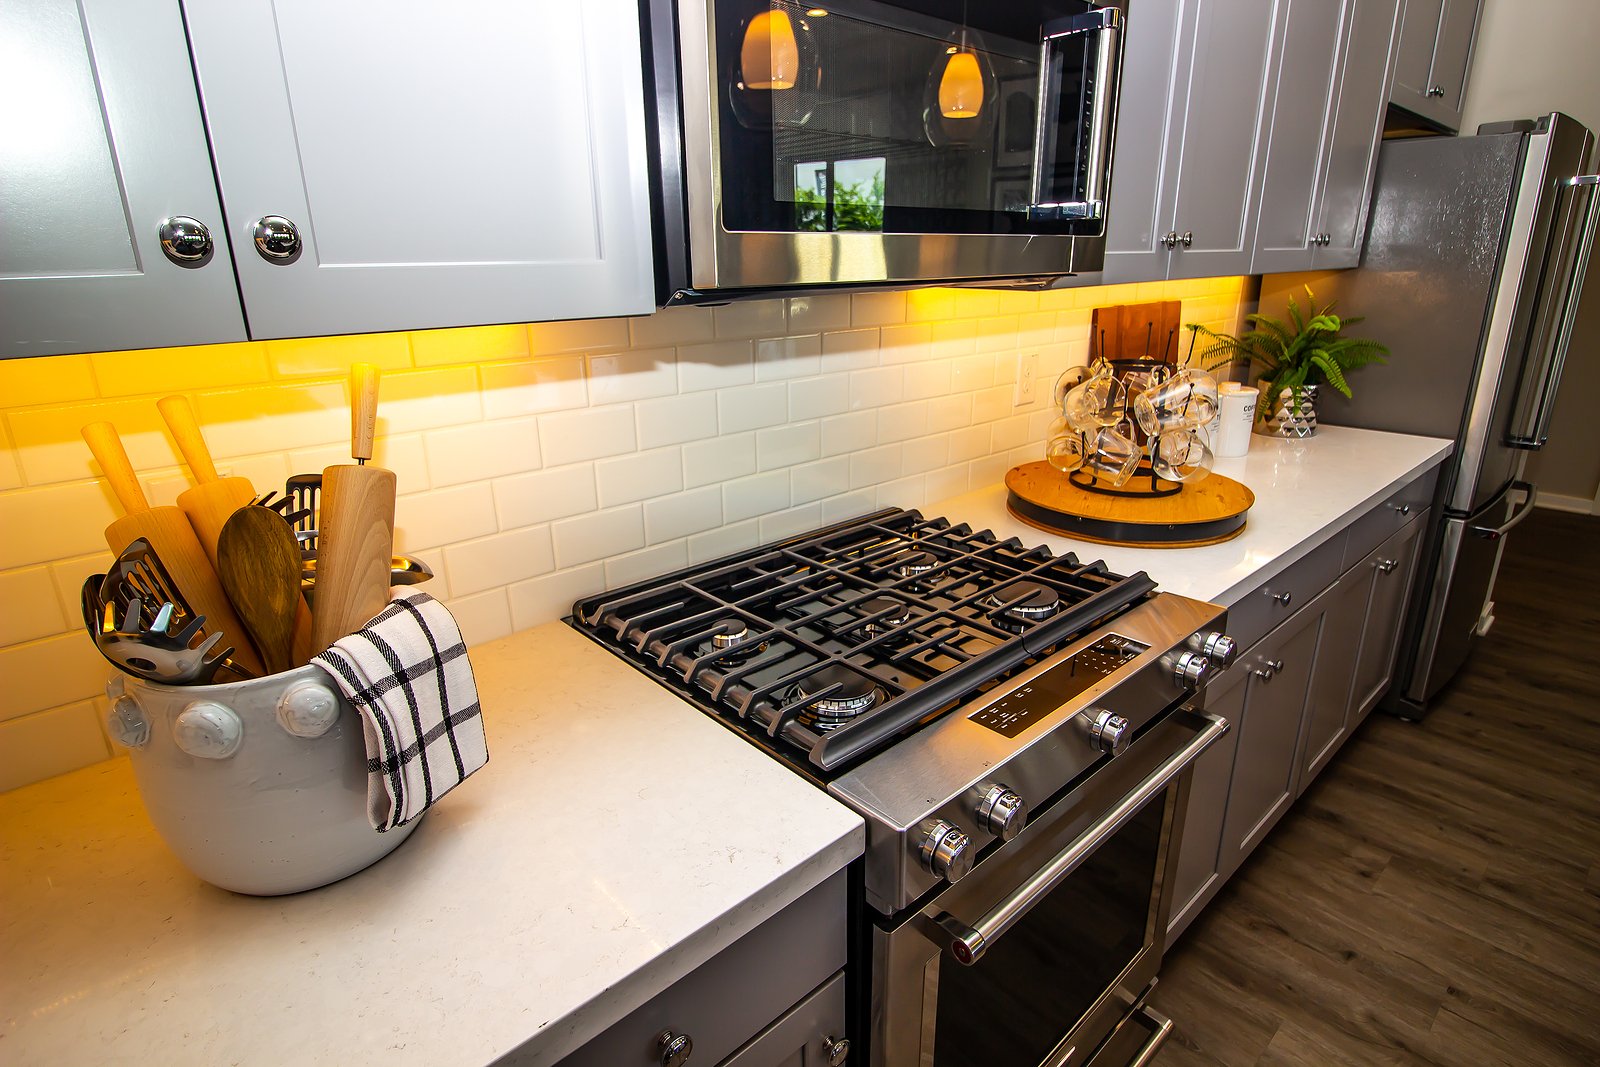 Illuminate-Your-Space-Explore-the-Benefits-of-Under-Cabinet-Lighting